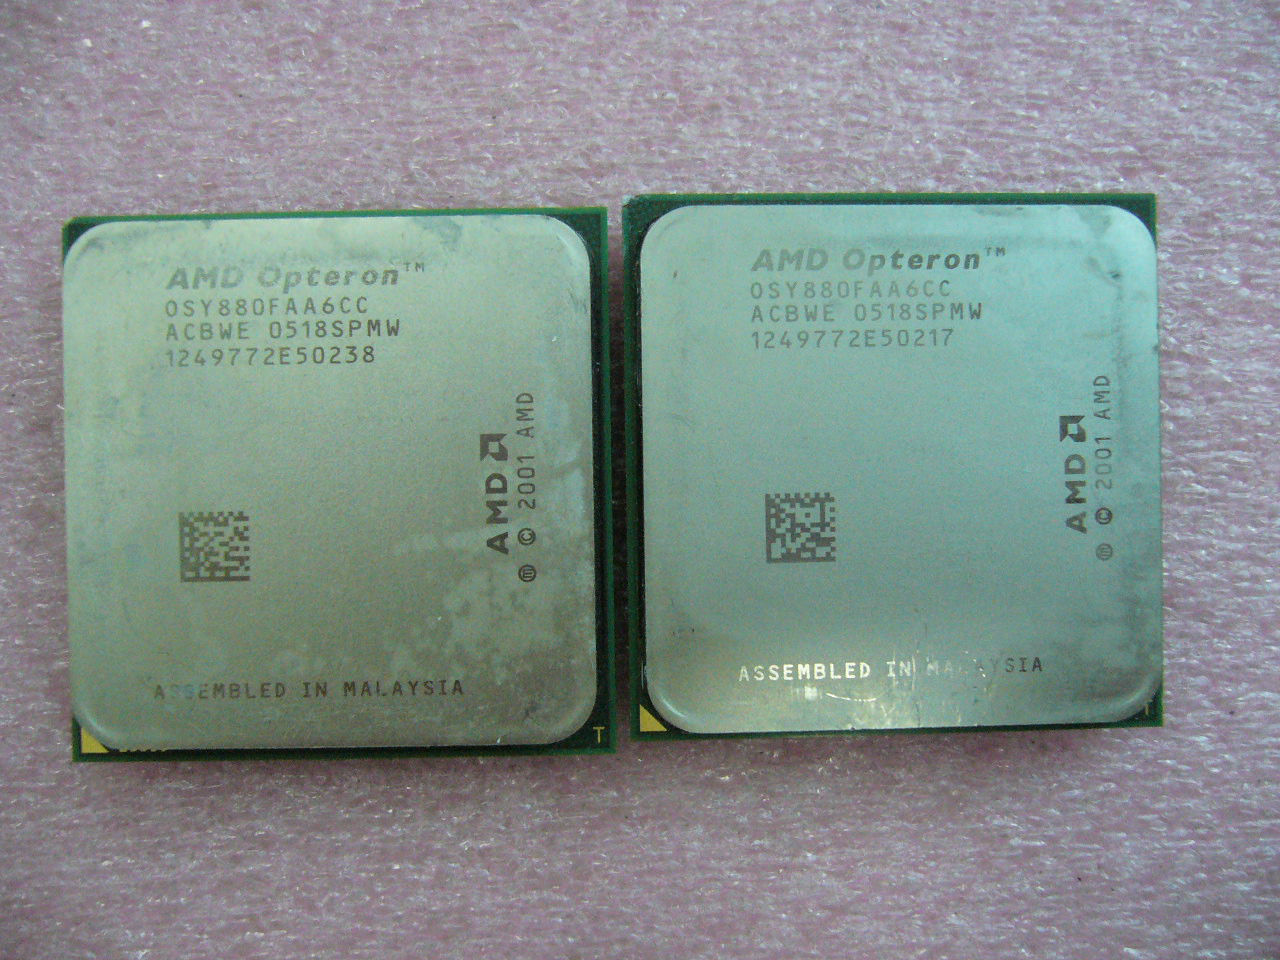 Matched Pair QTY 2x AMD Opteron 880 2.4 GHz Dual-Core OSY880FAA6CC Processor